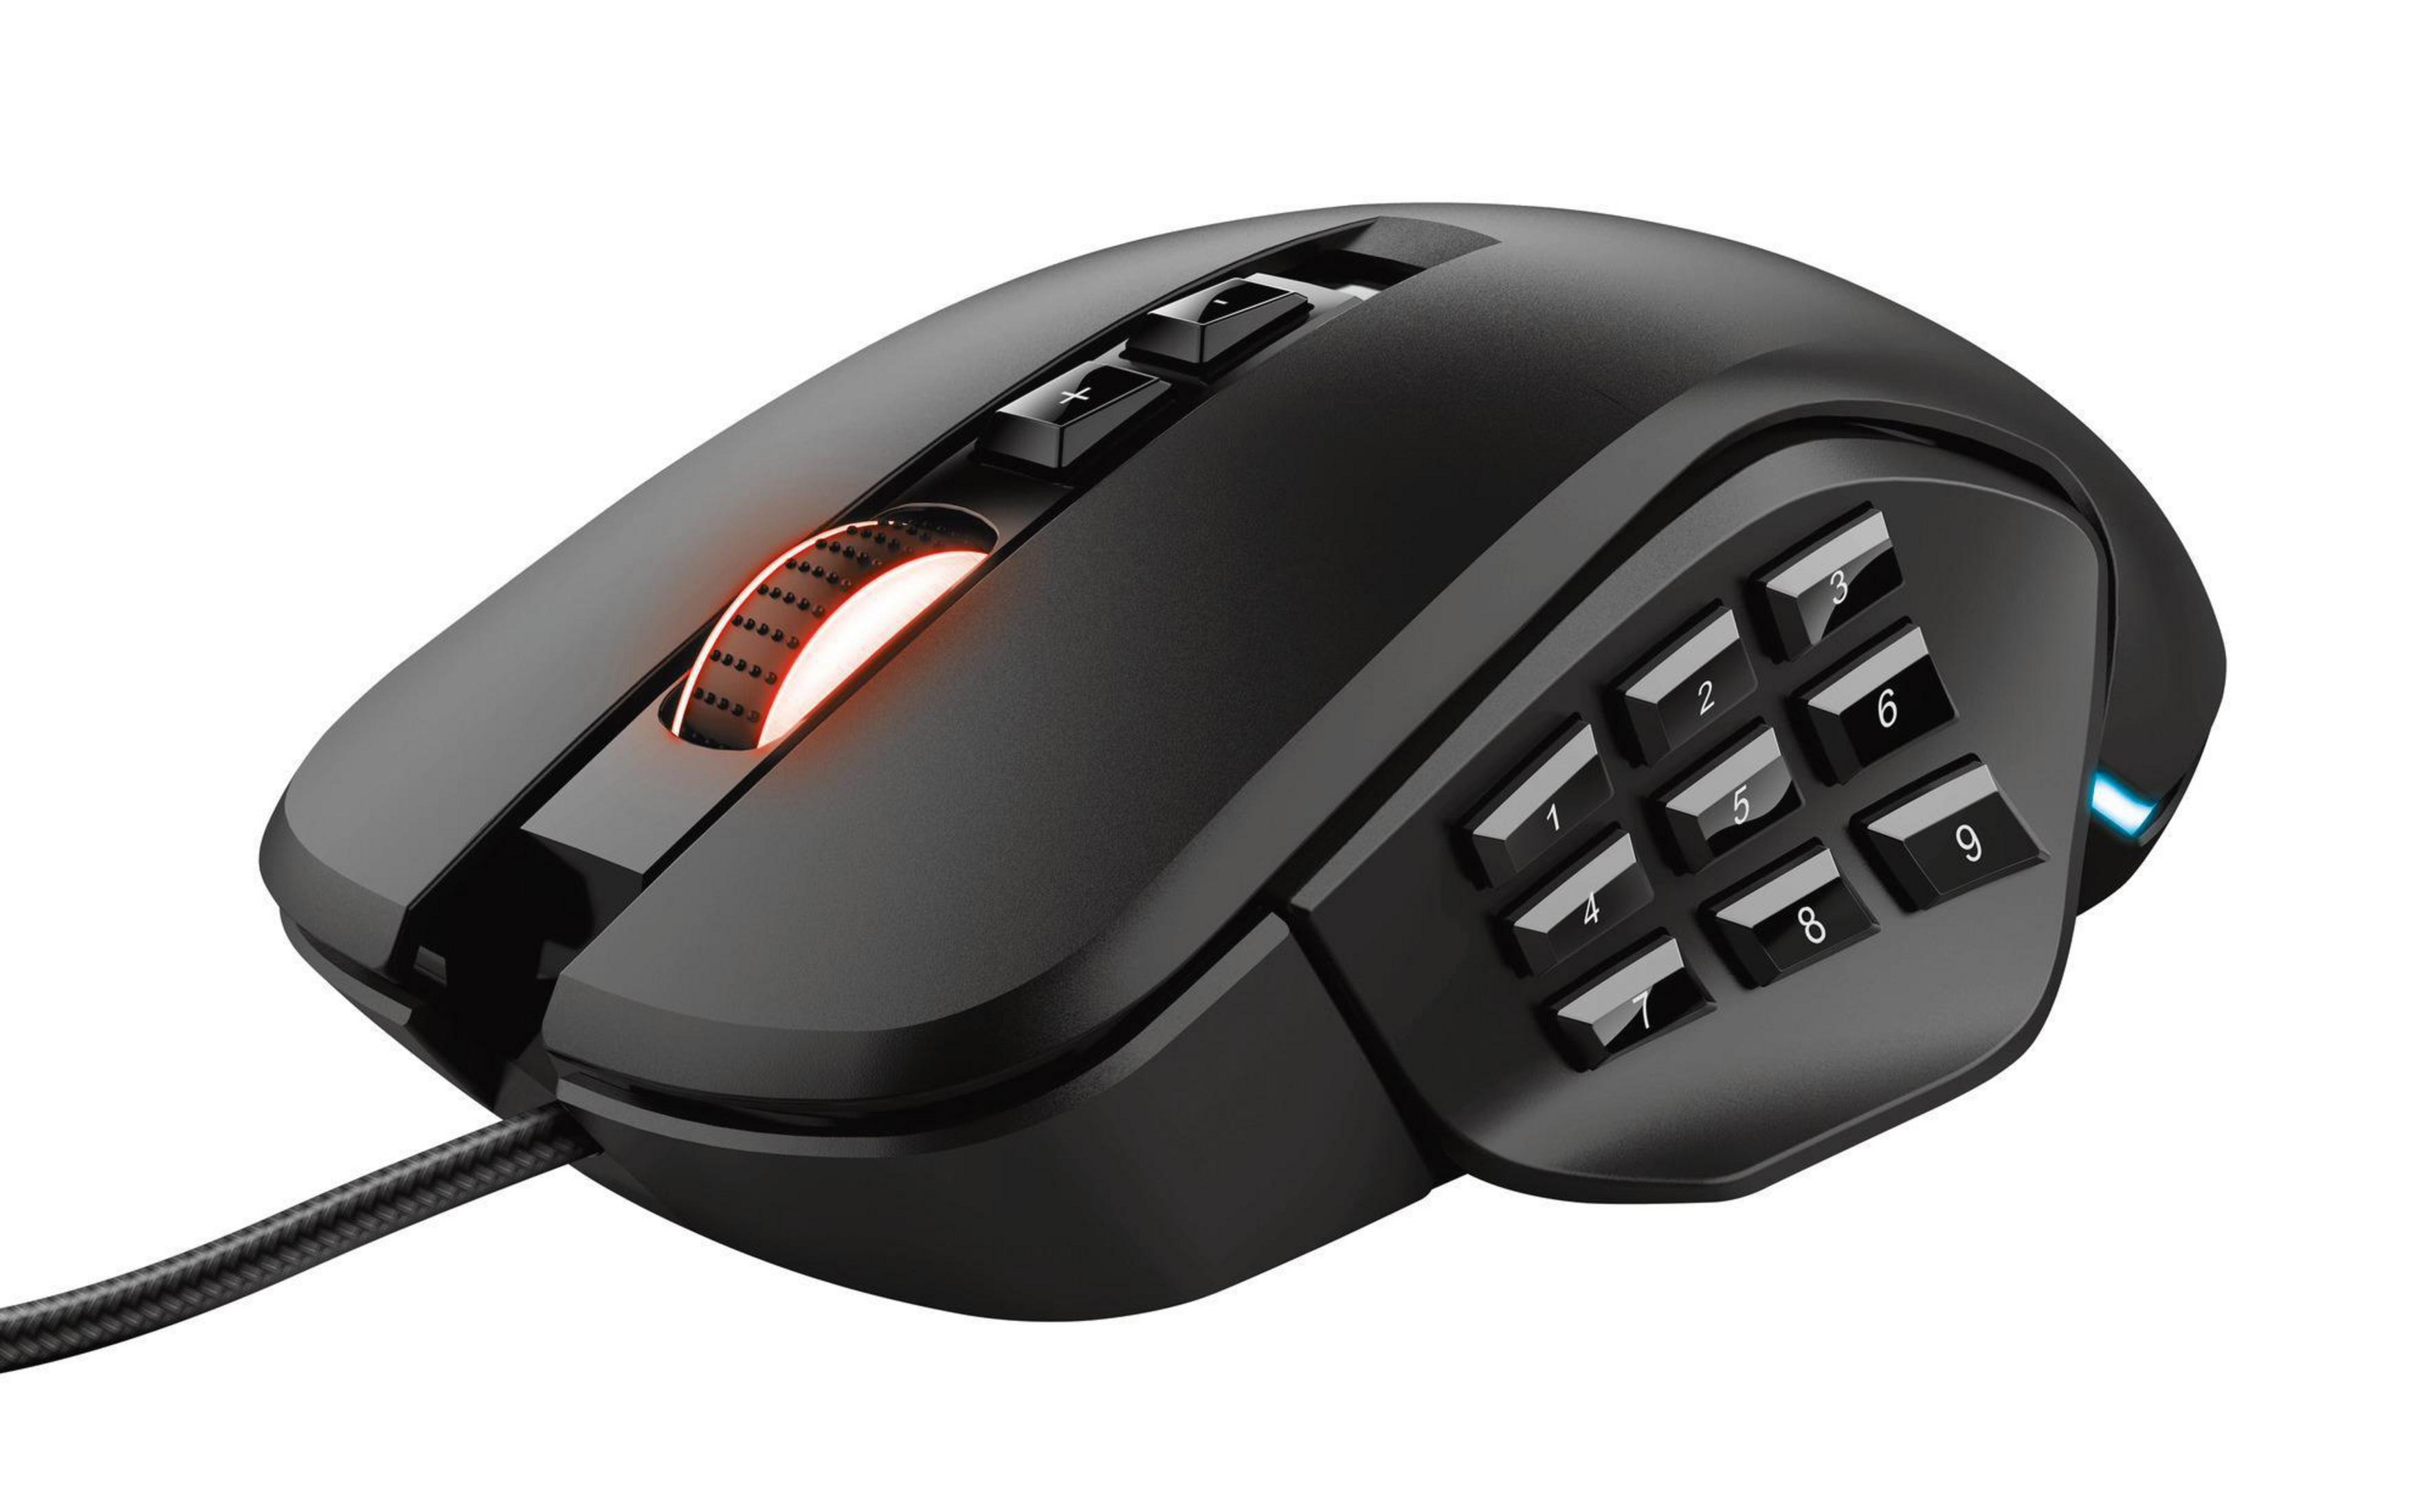 TRUST 23764 GXT 970 Schwarz MOUSE GAMING Gaming MORFIX CUSTOMISABLE Maus